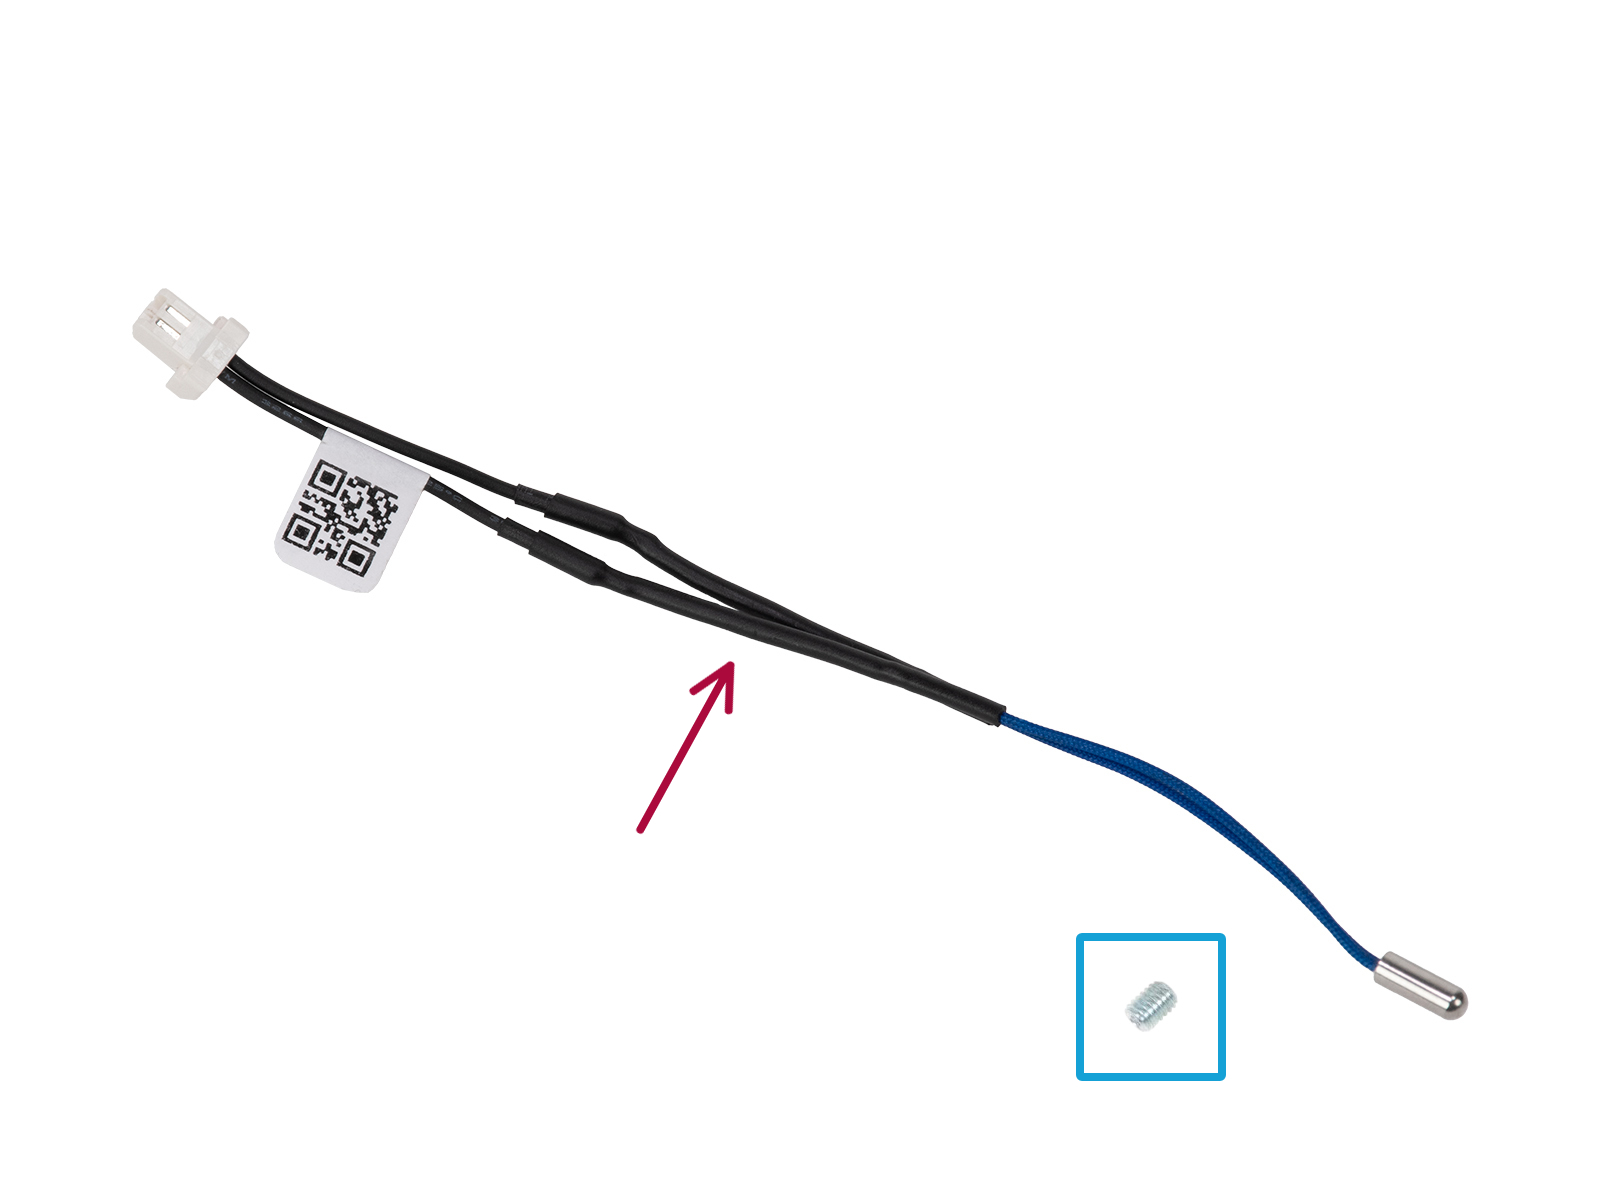 New hotend thermistor: parts preparation